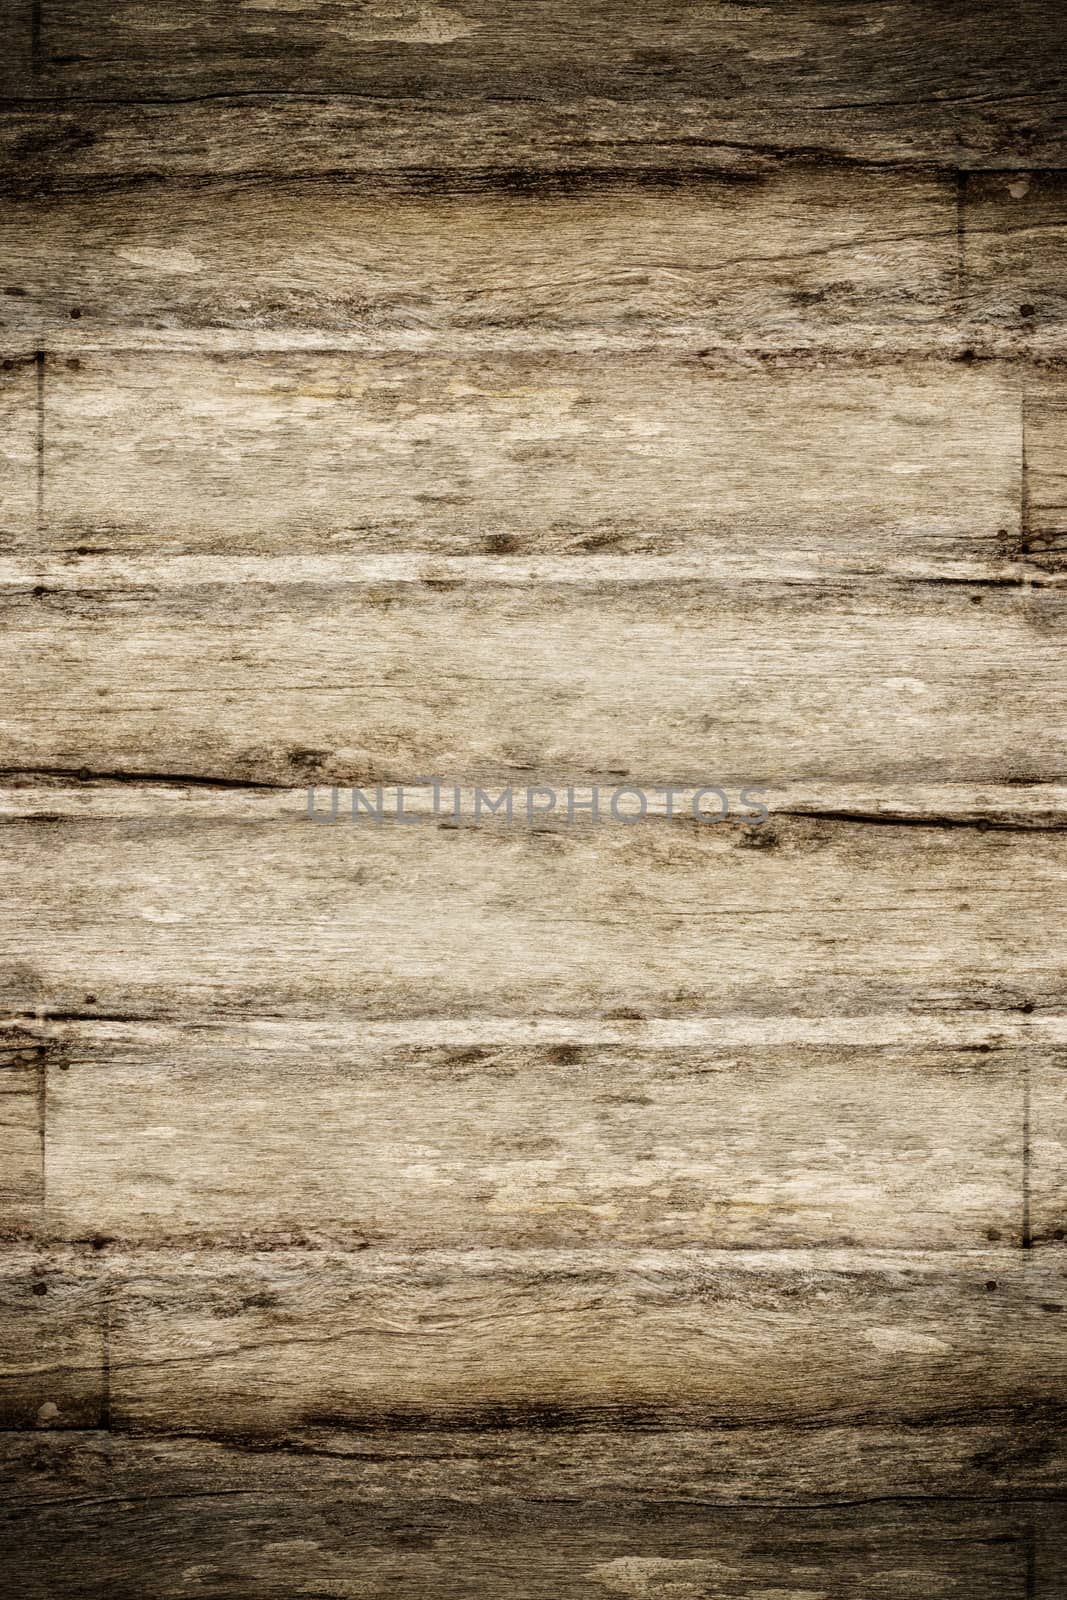 Brown wood plank wall texture background by Noppharat_th